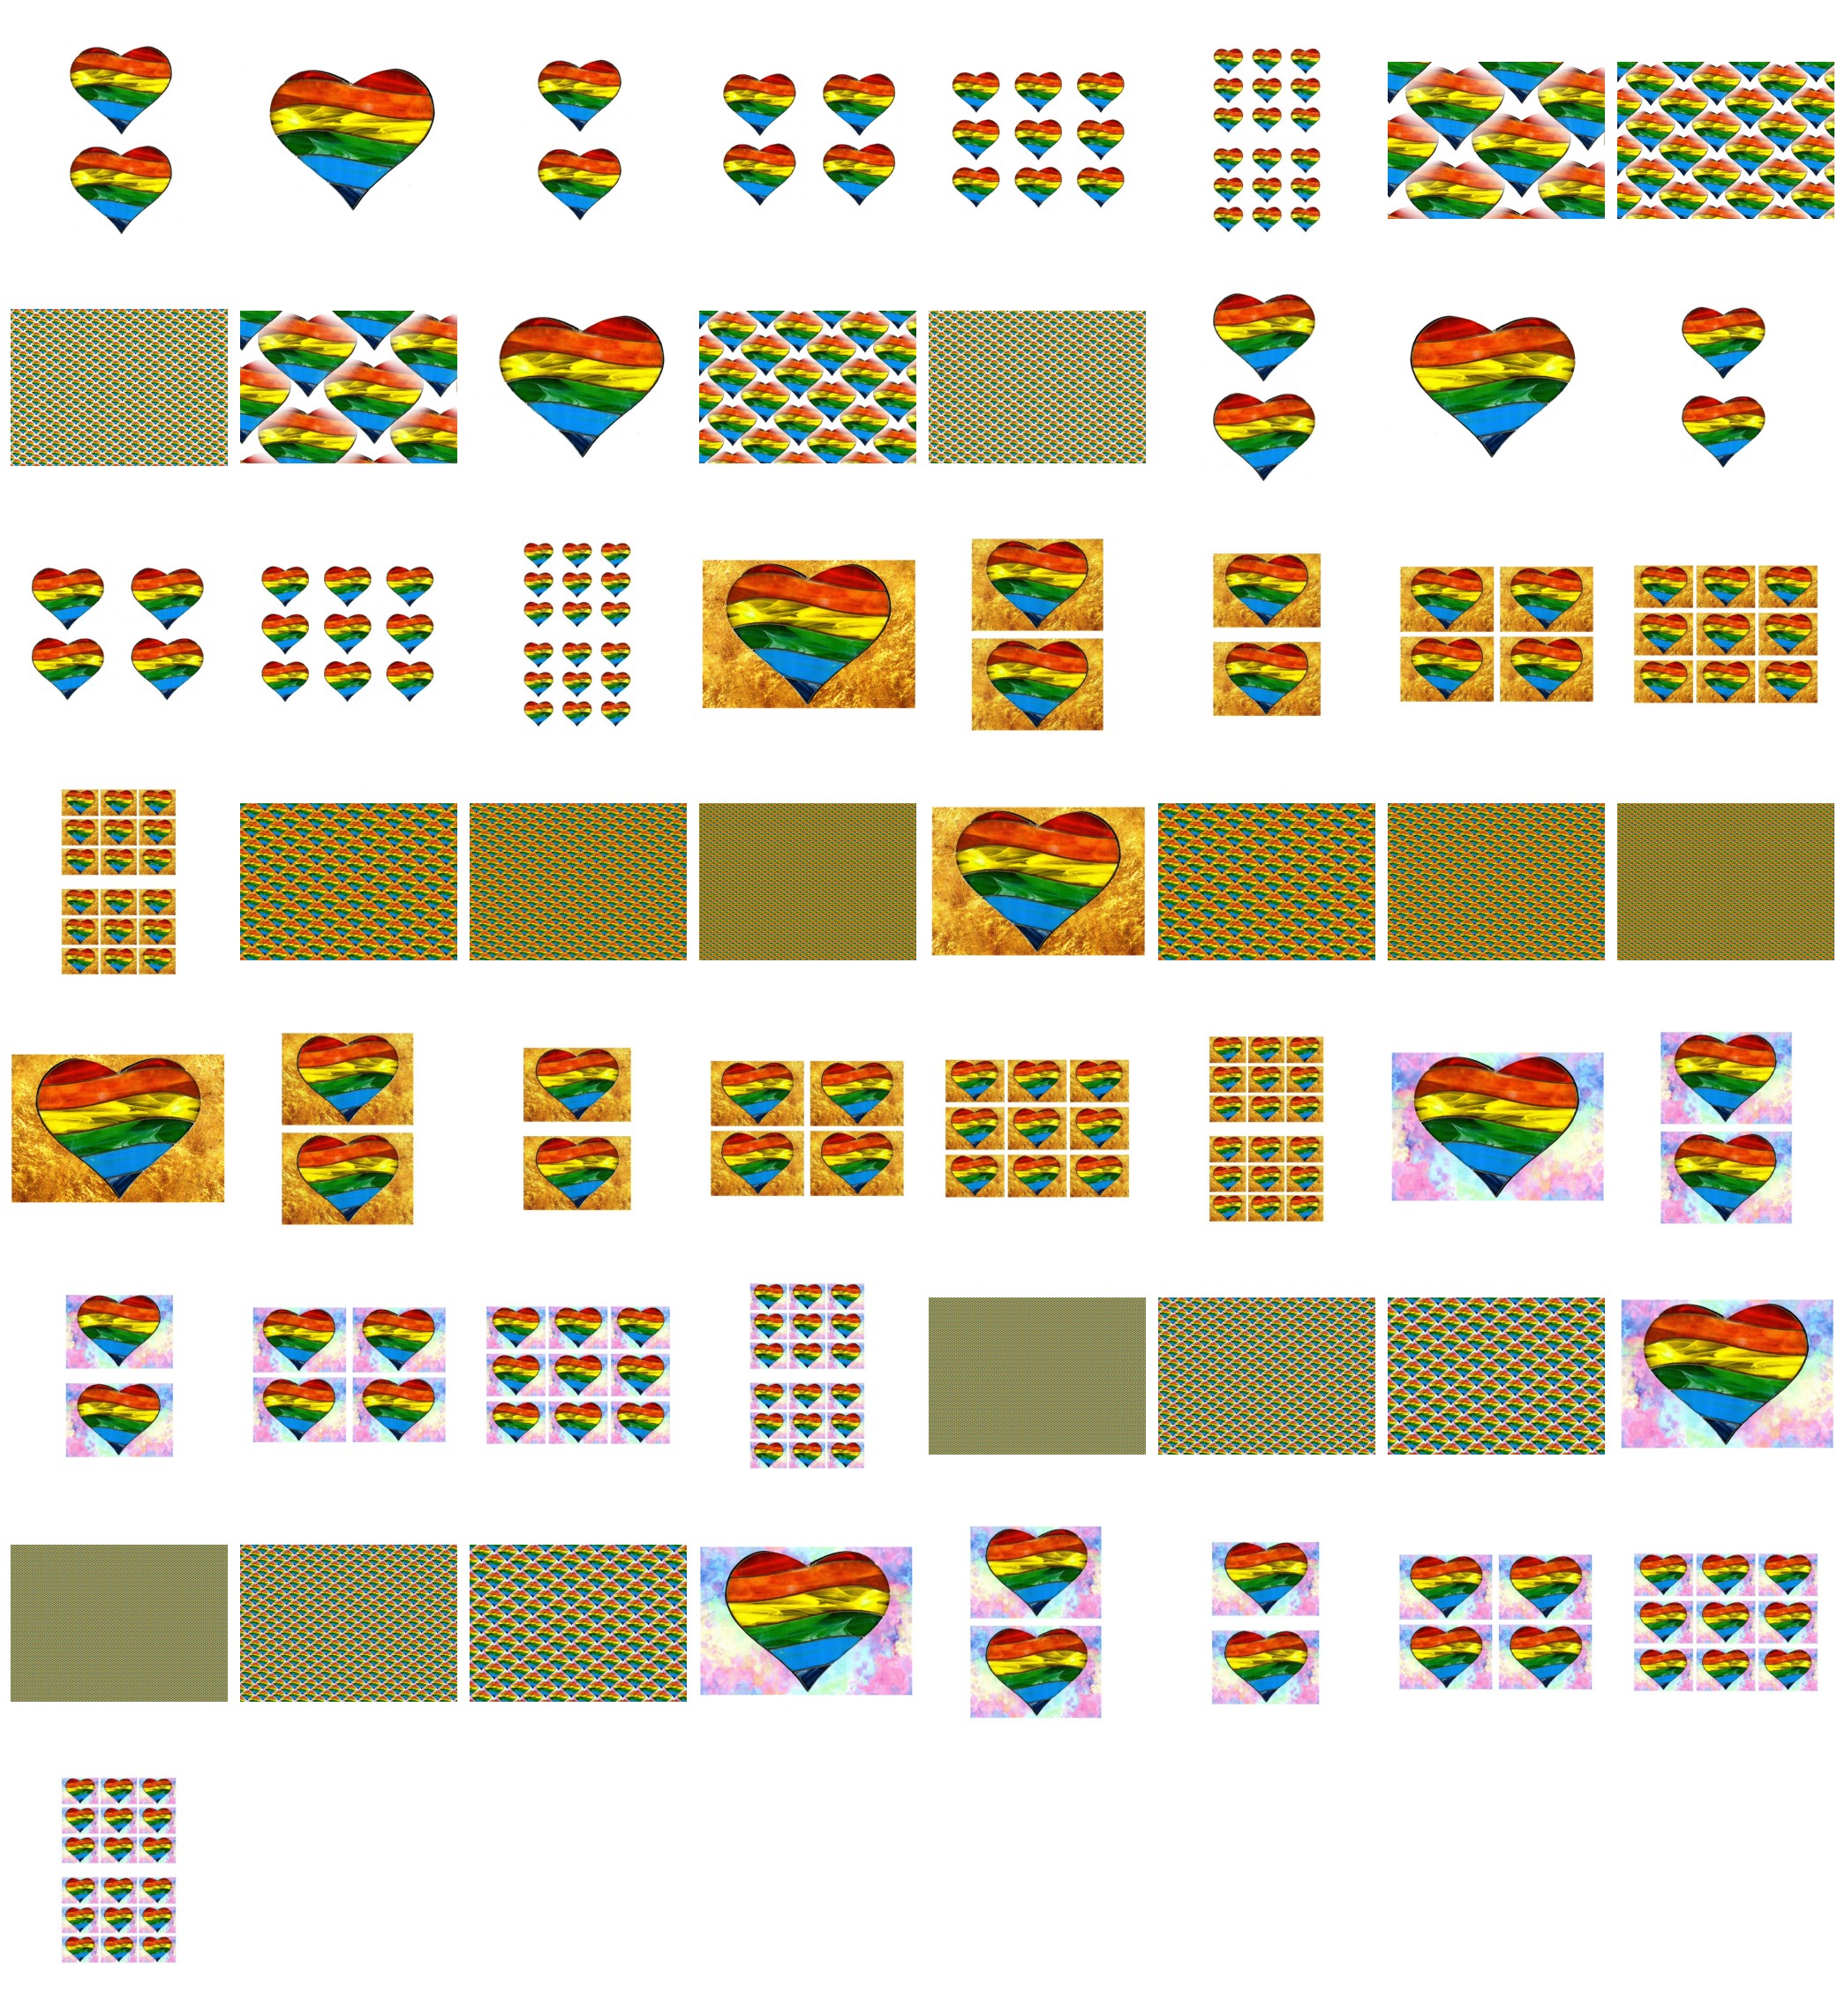 FREE DOWNLOAD - Stained Glass Rainbow Heart Set 57 Pages to Download